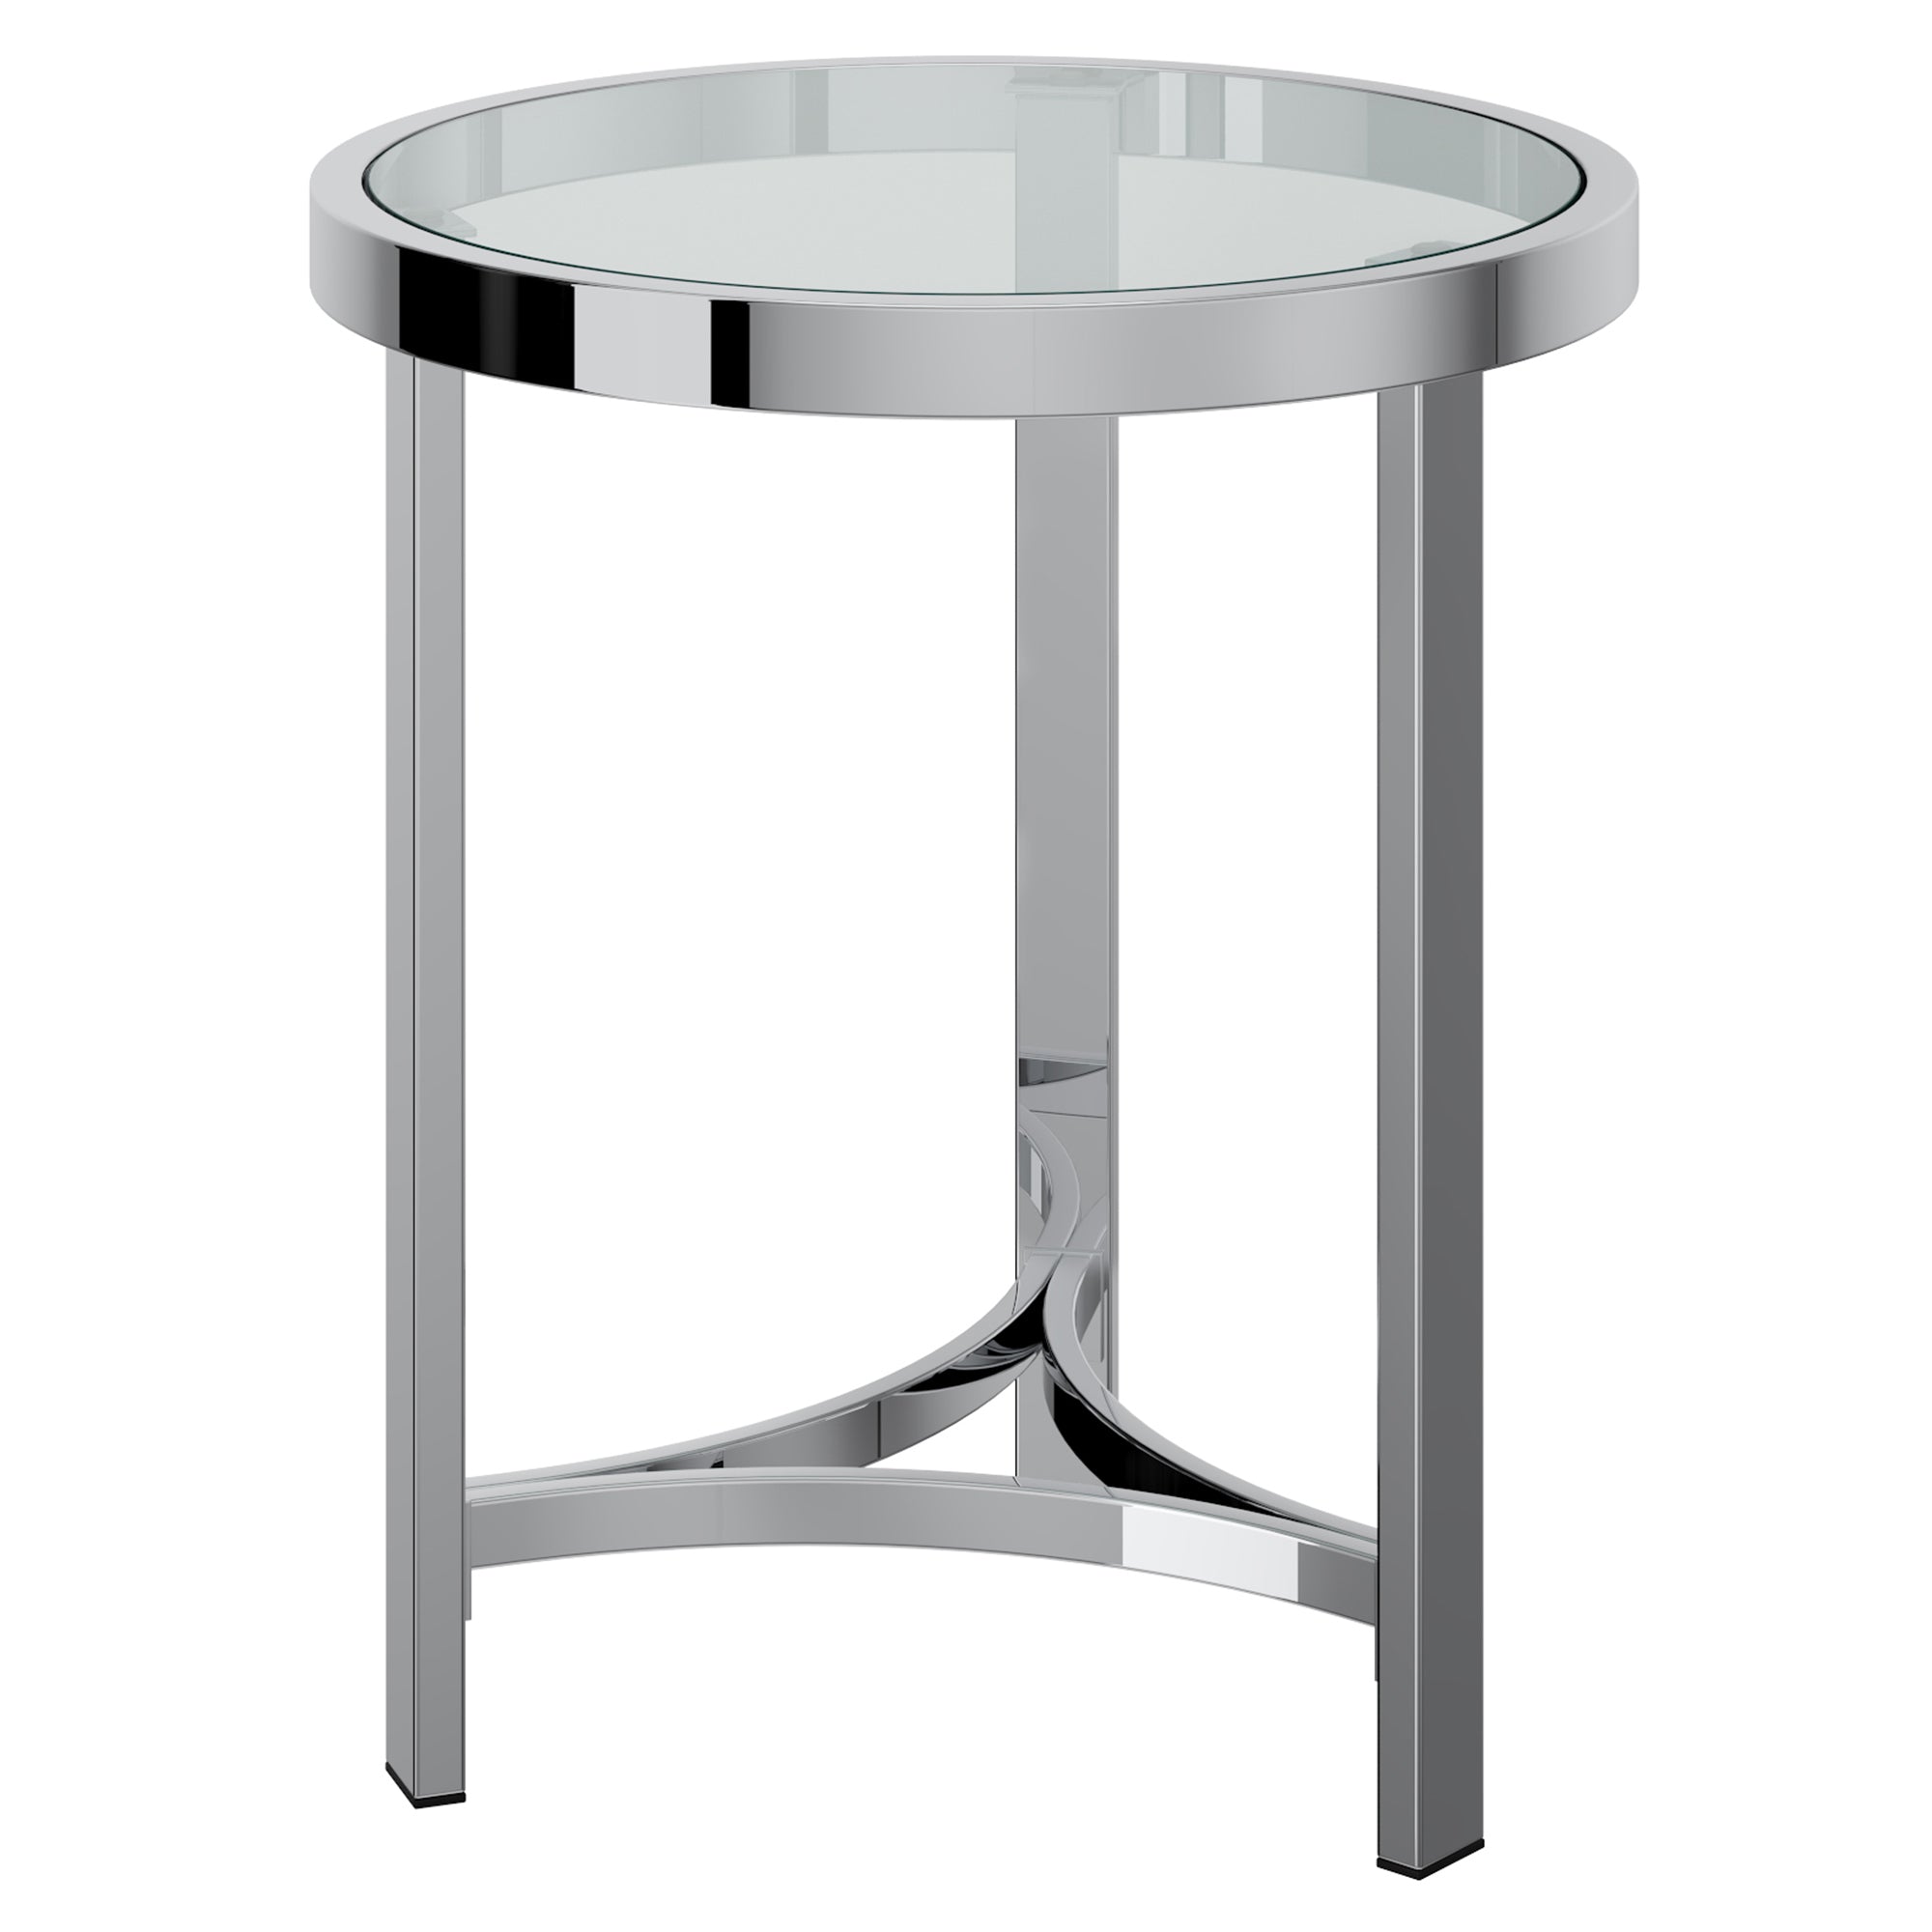 Trotwood Metal/Glass Round Accent Table - Chrome